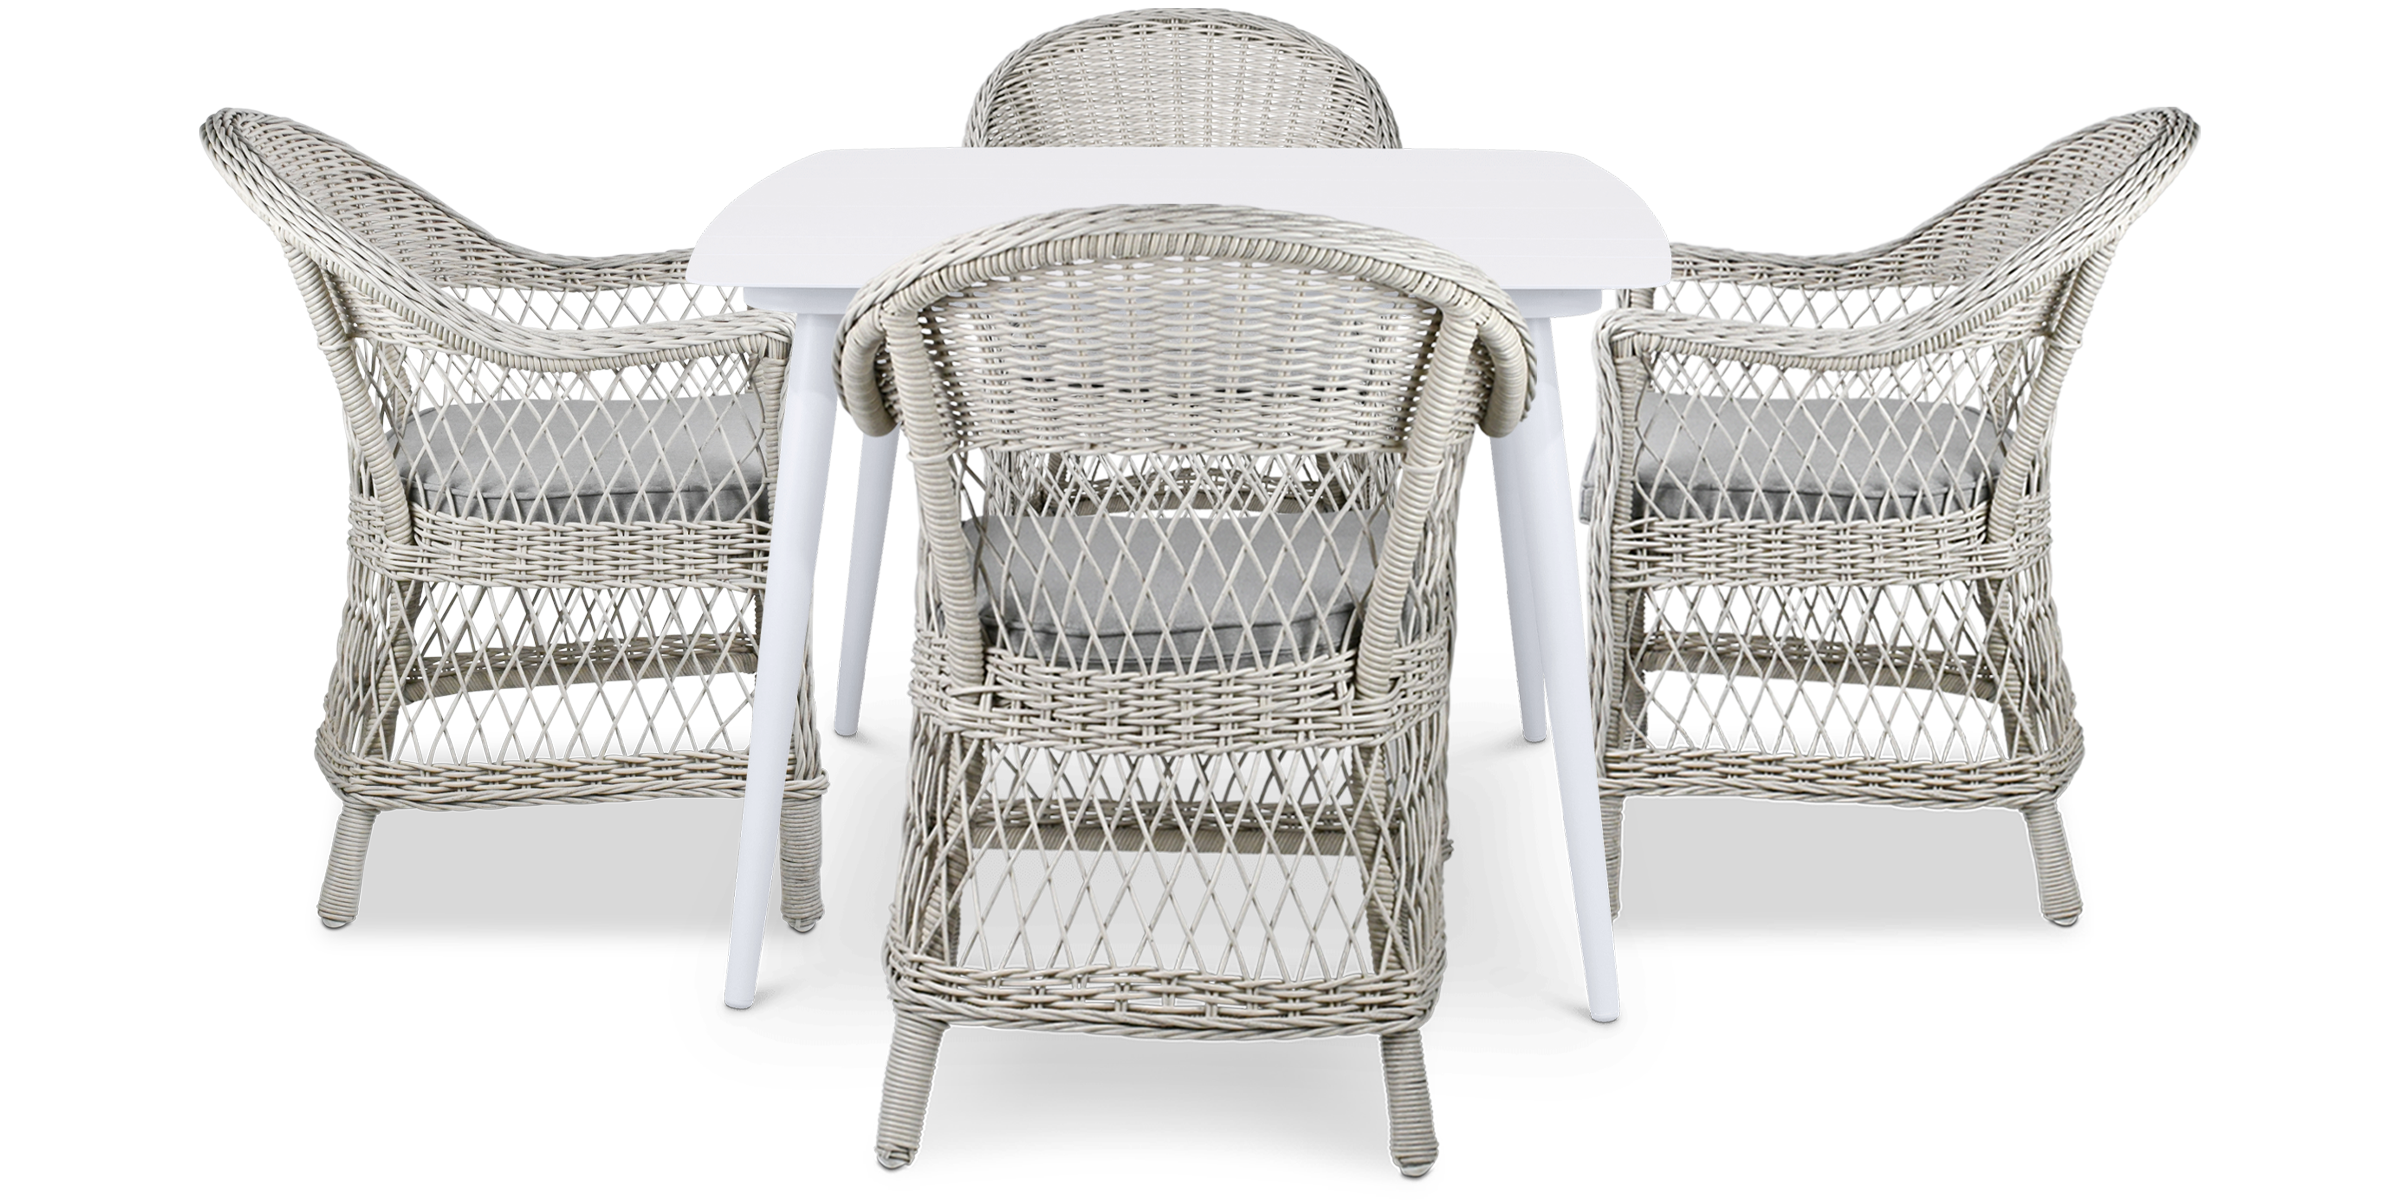 Amalfi Square 5 Piece Outdoor Setting in Arctic White with Wicker Chairs